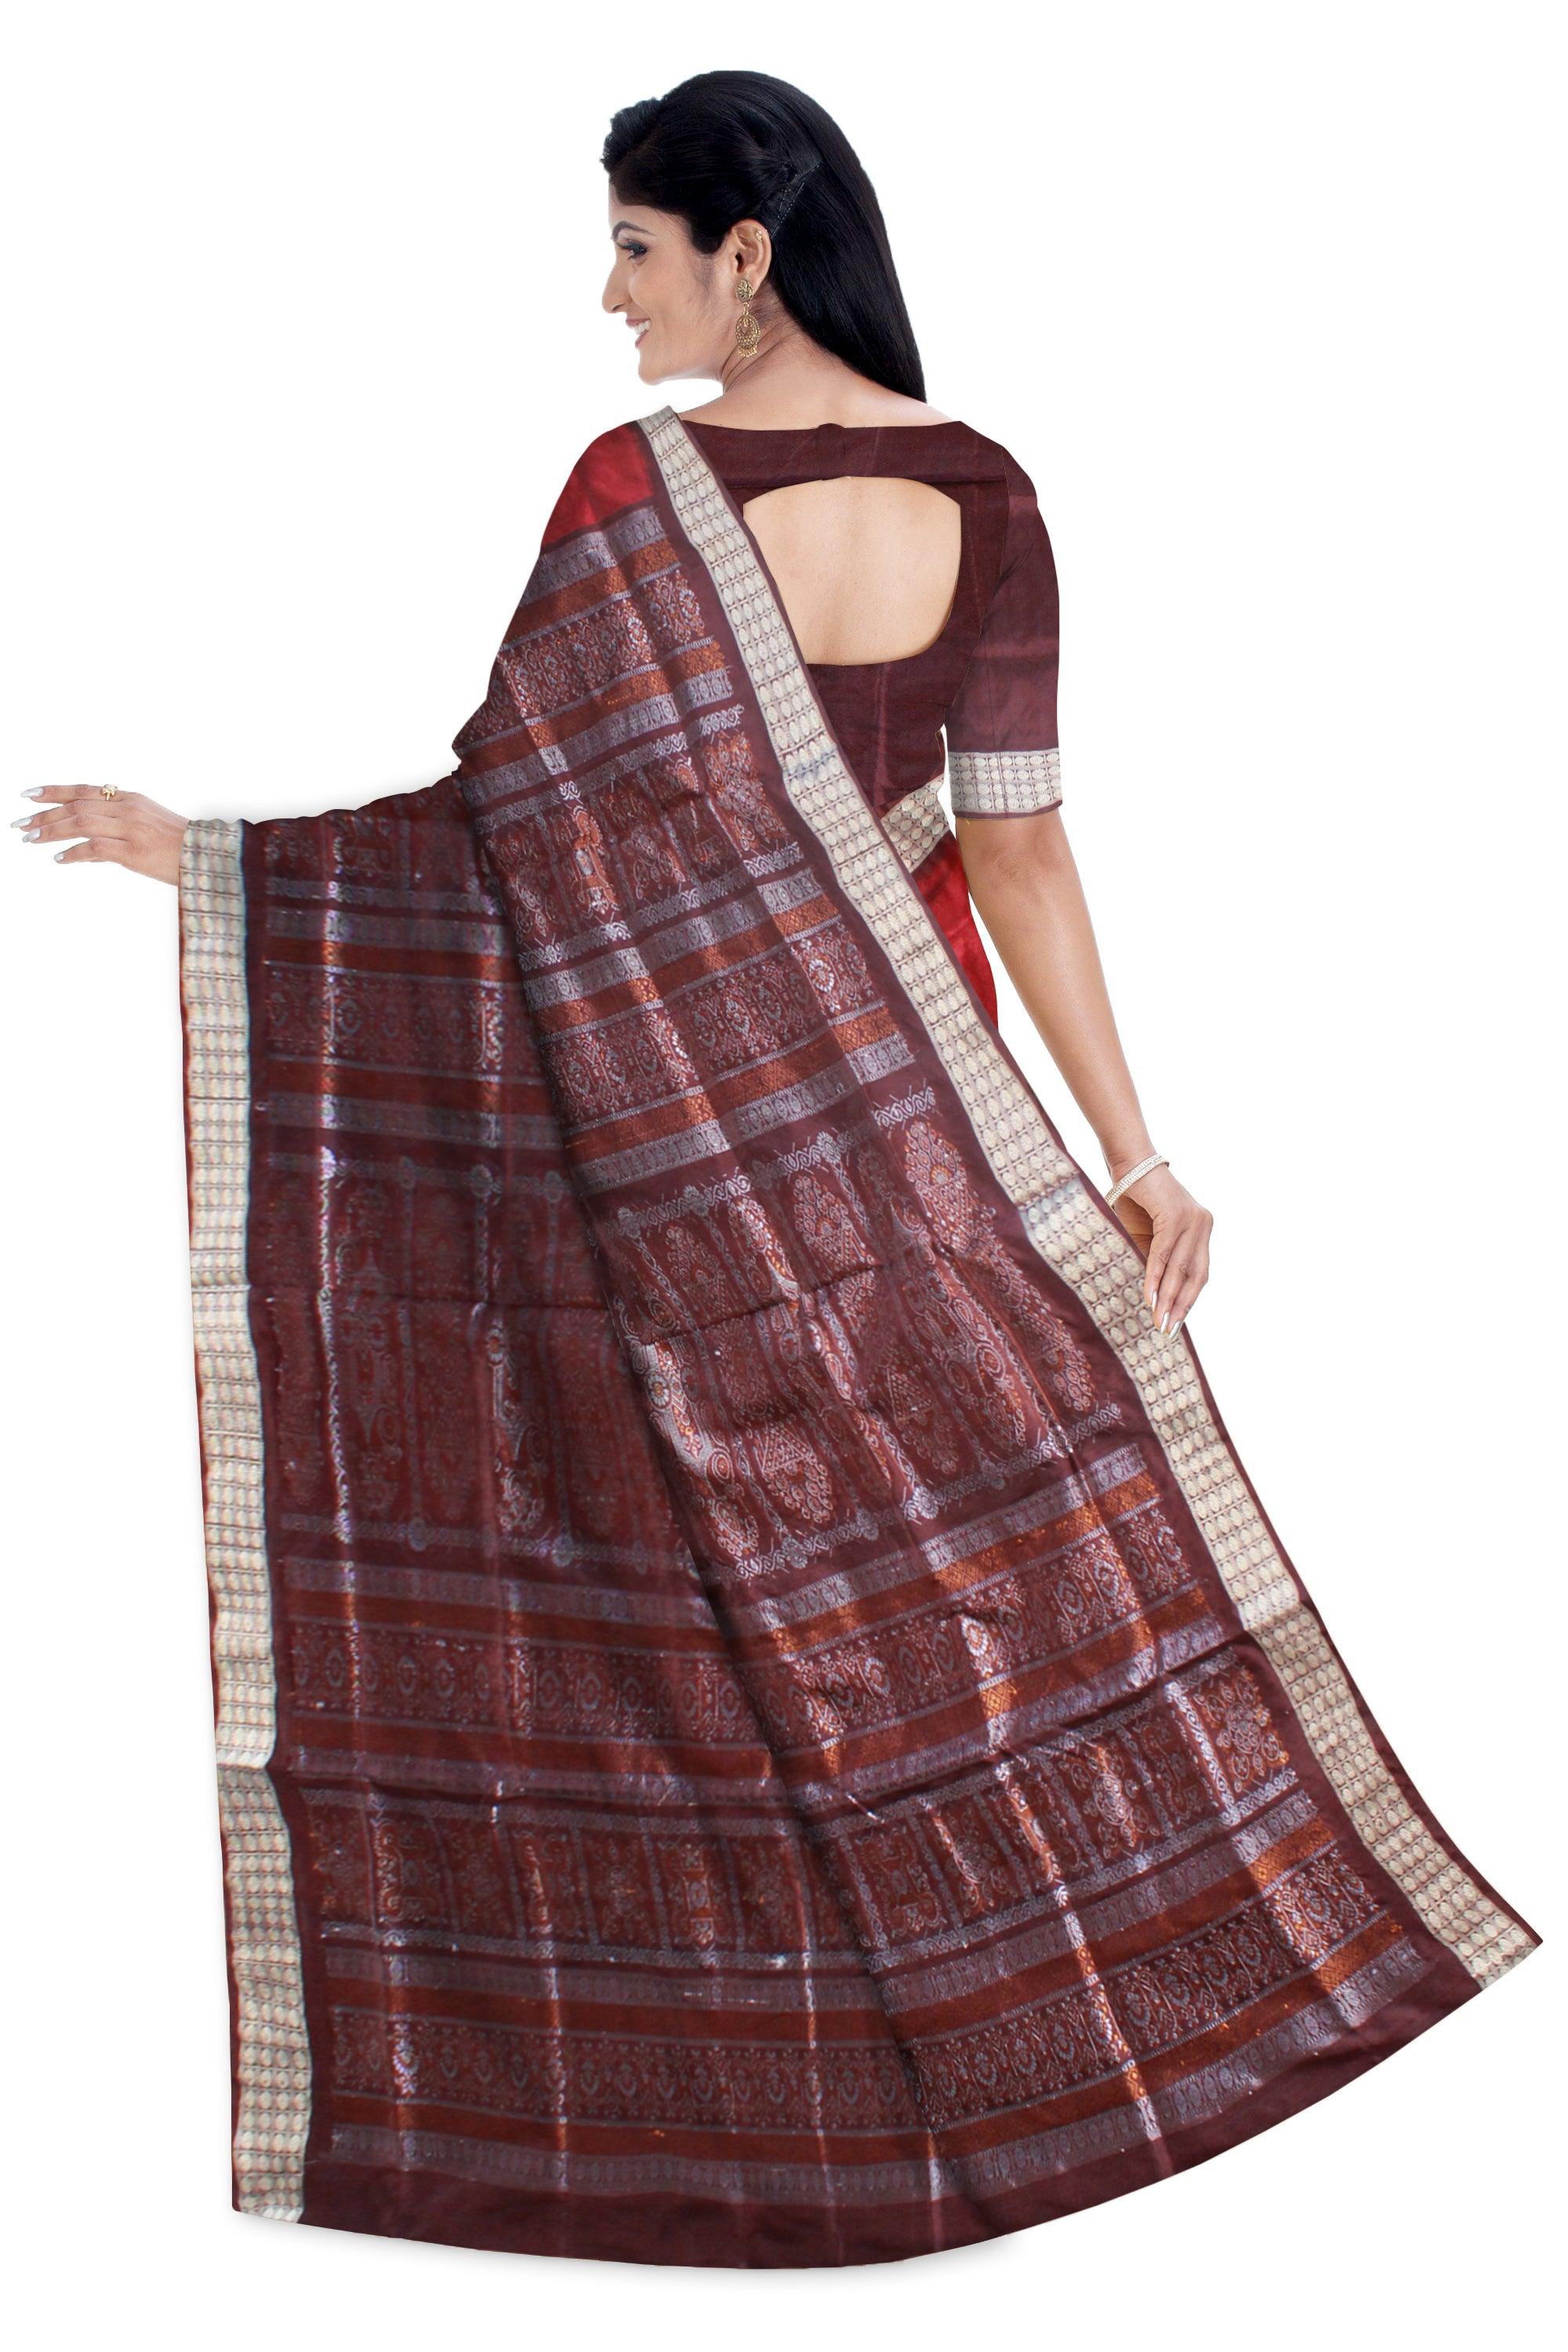 NEW ARRIVAL SABITRI SPECIAL MAROON AND COFFEE COLOR PATA SAREE ,  MATCHING BLOUSE PIECE. - Koshali Arts & Crafts Enterprise